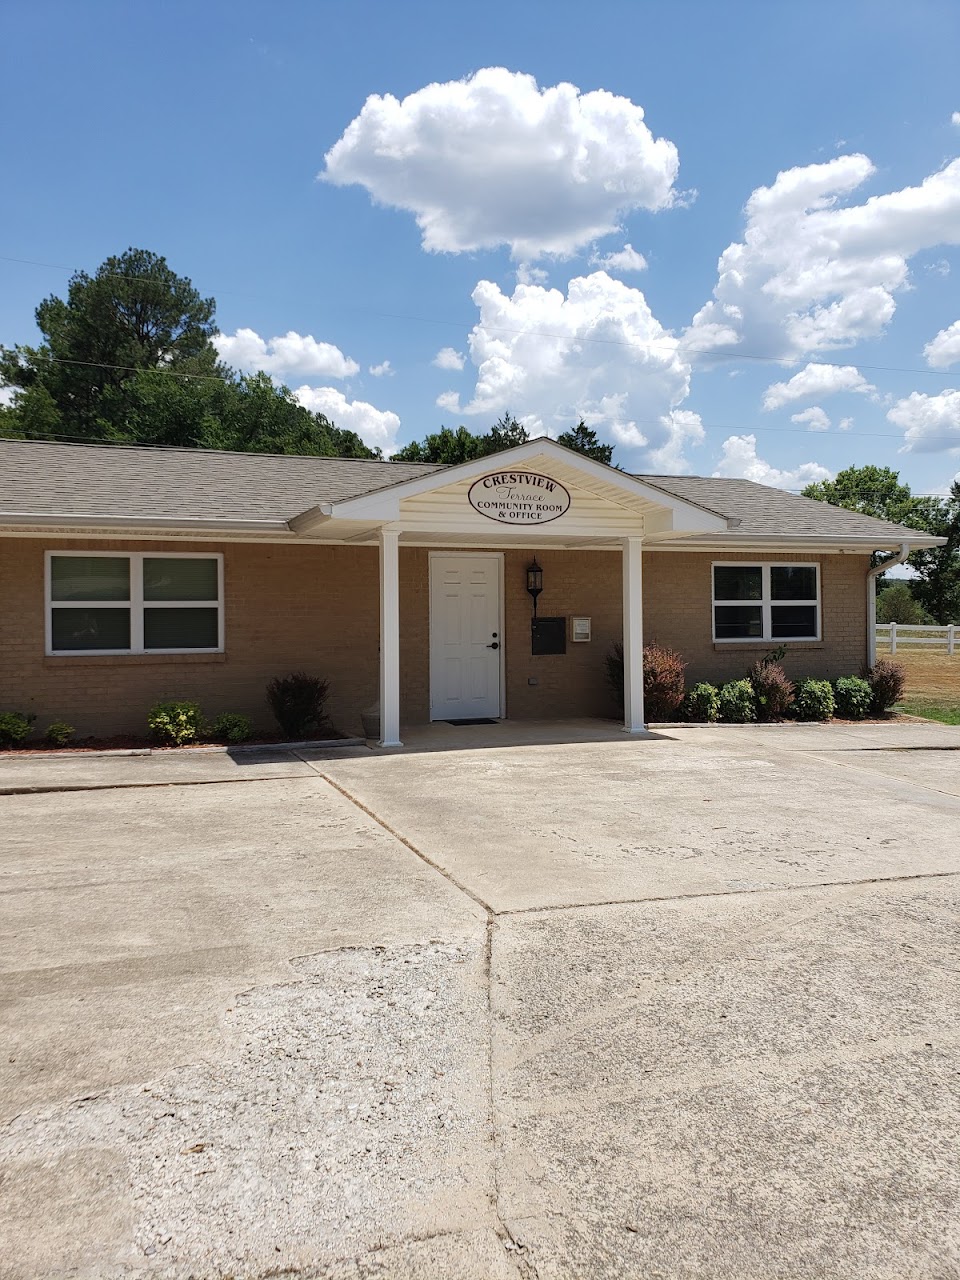 Photo of CALICO TERRACE. Affordable housing located at 200 HIGHLAND ST CALICO ROCK, AR 72519